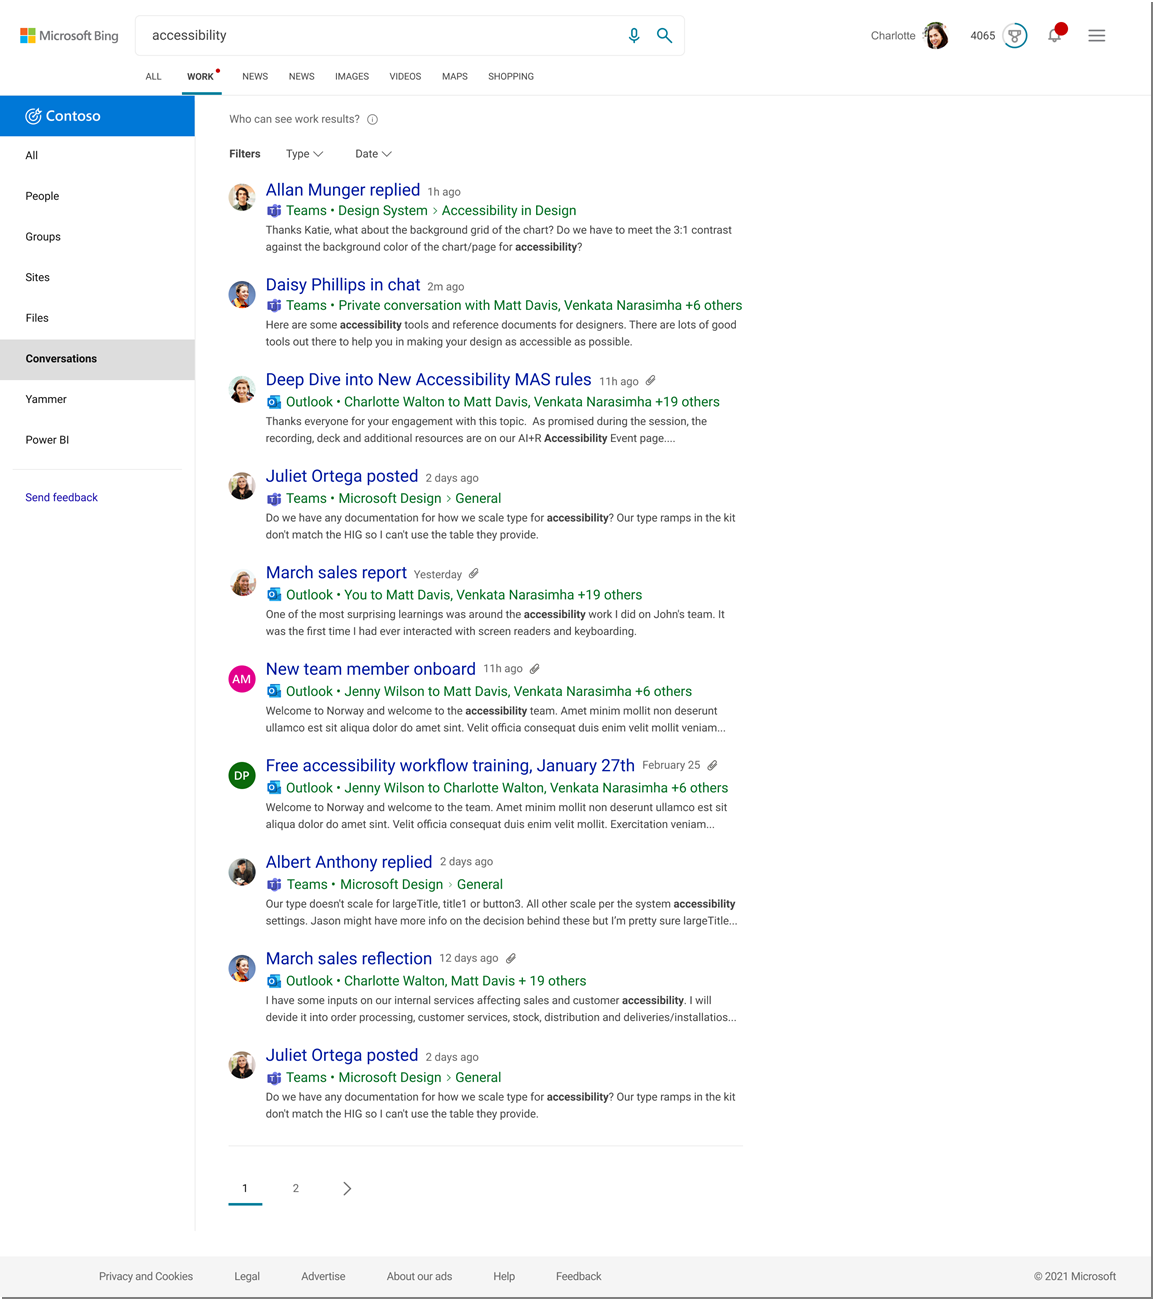 Yammer results will be displayed under the new Yammer vertical.